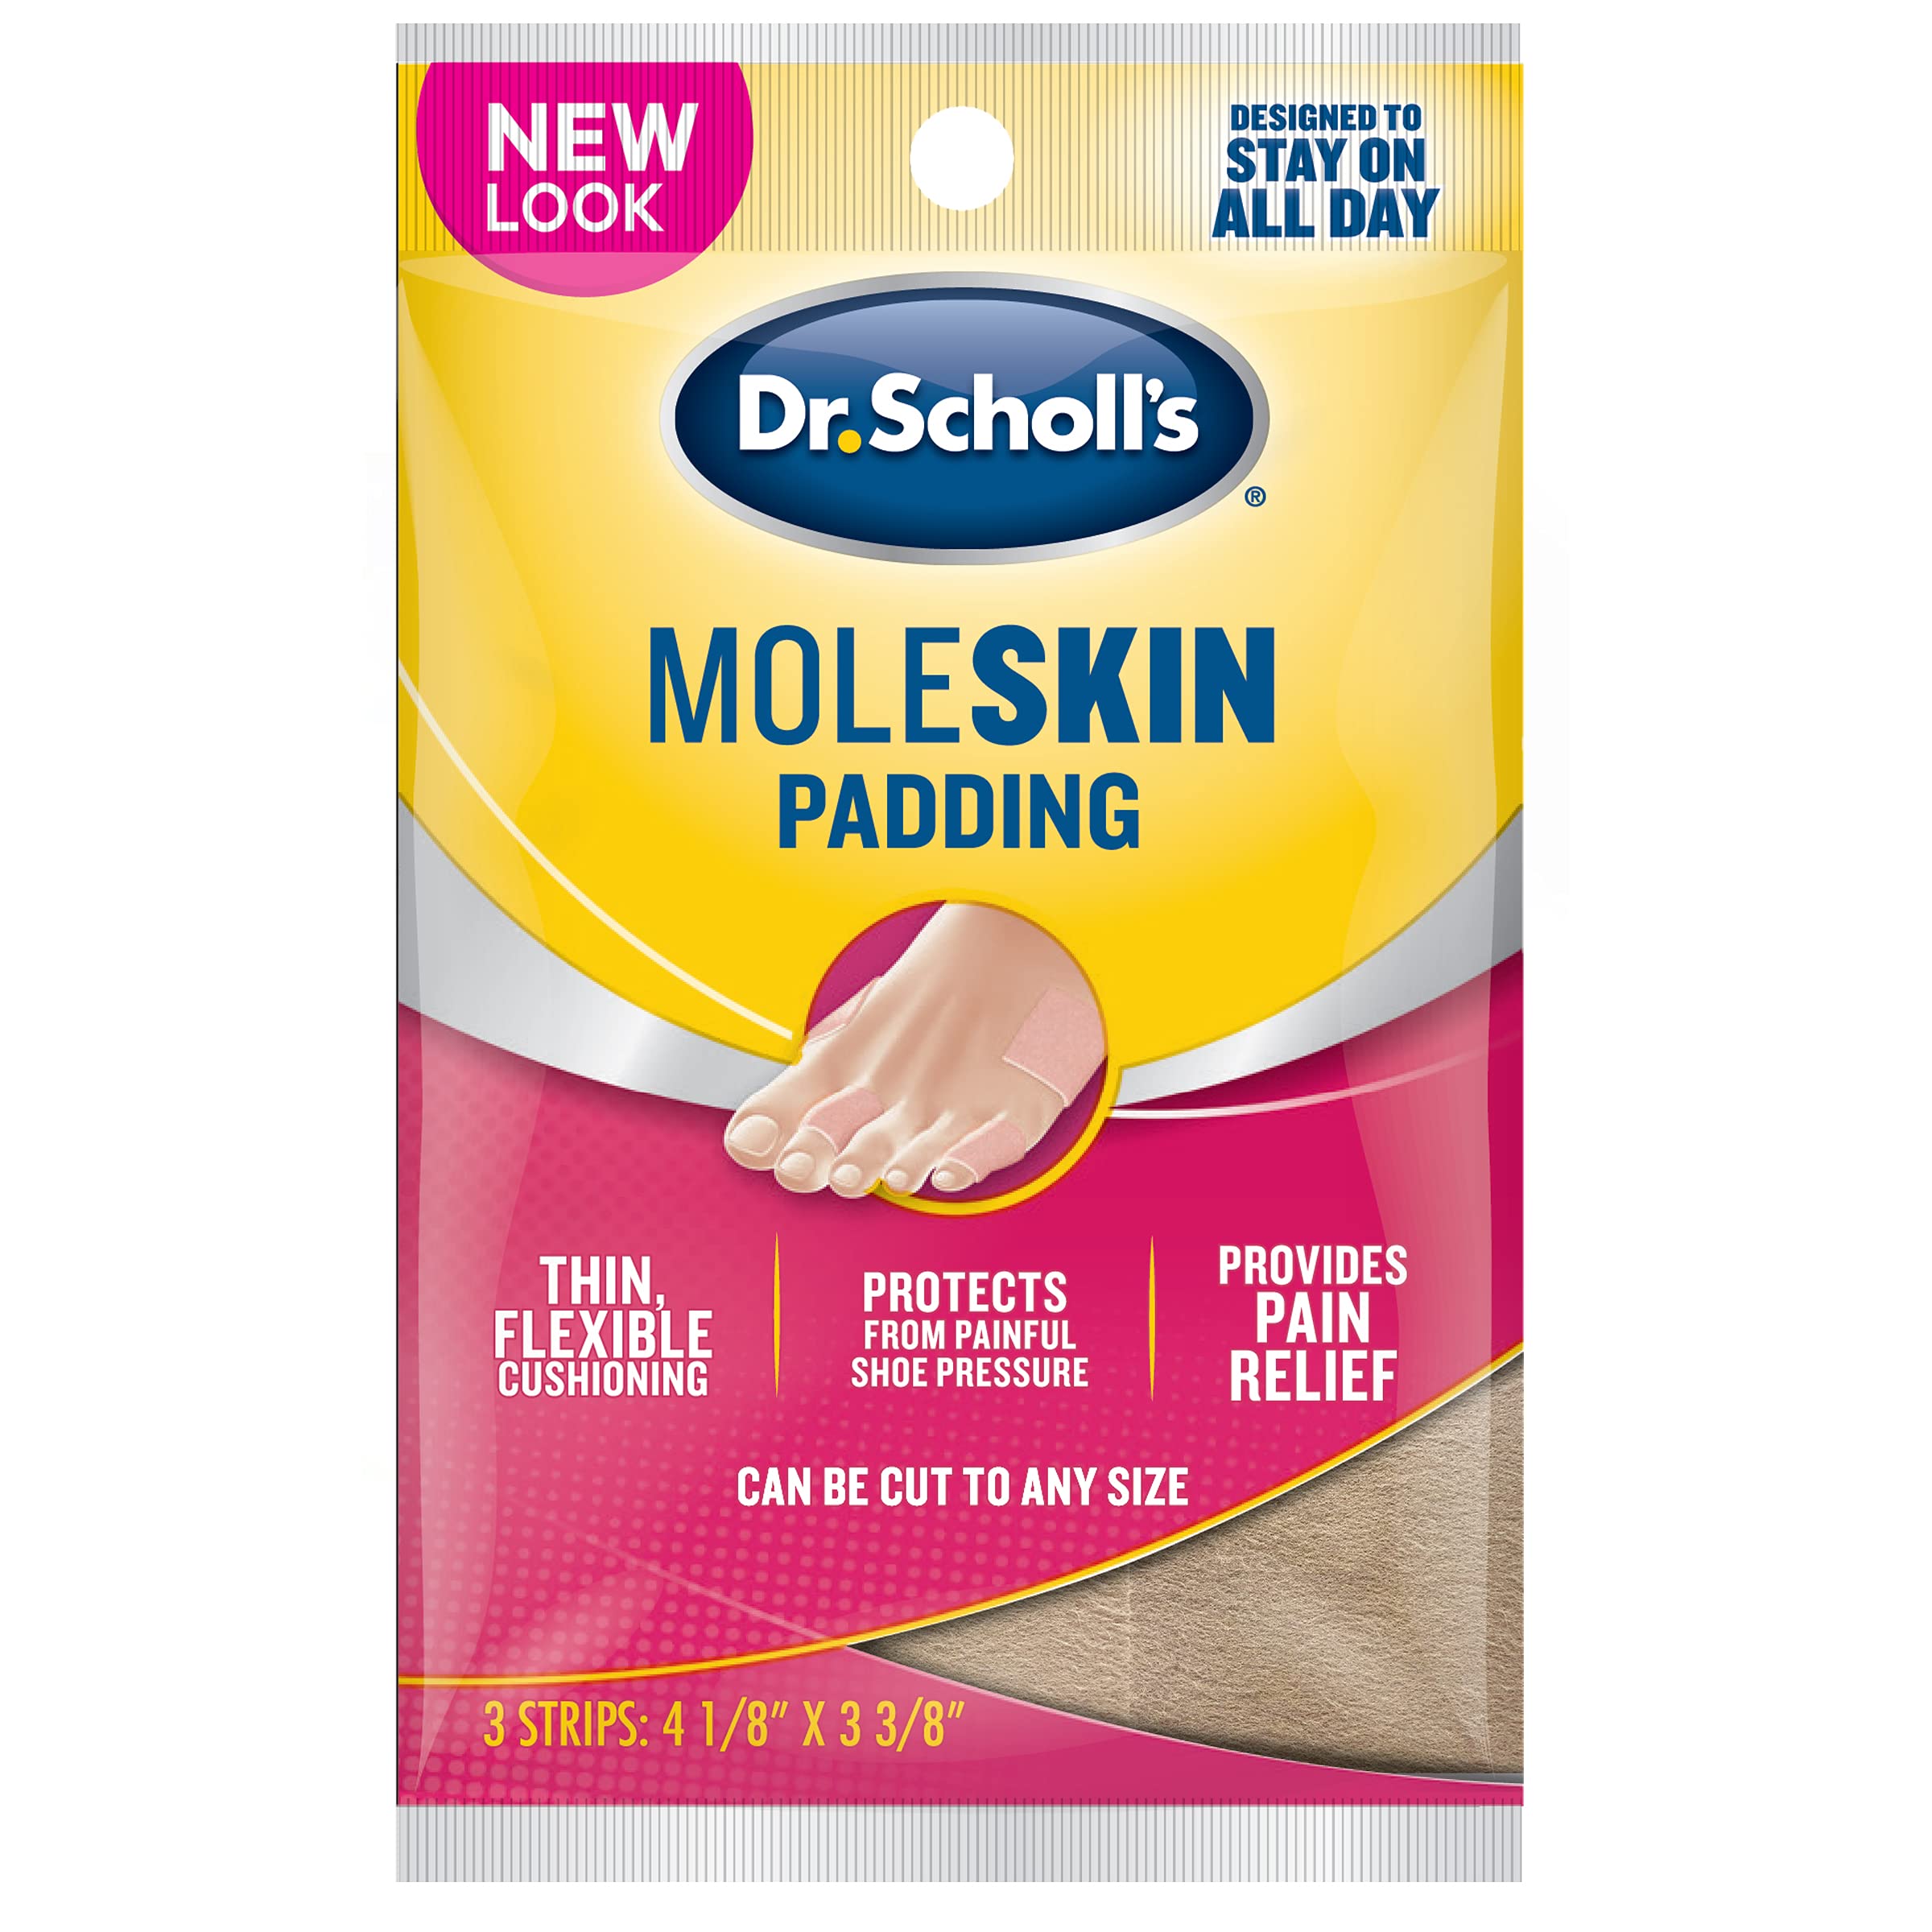 3-Strips Dr. Scholl's Moleskin Padding (Can Be Cut to Any Size) $2.90 w/ S&S + Free Shipping w/ Prime or on $25+